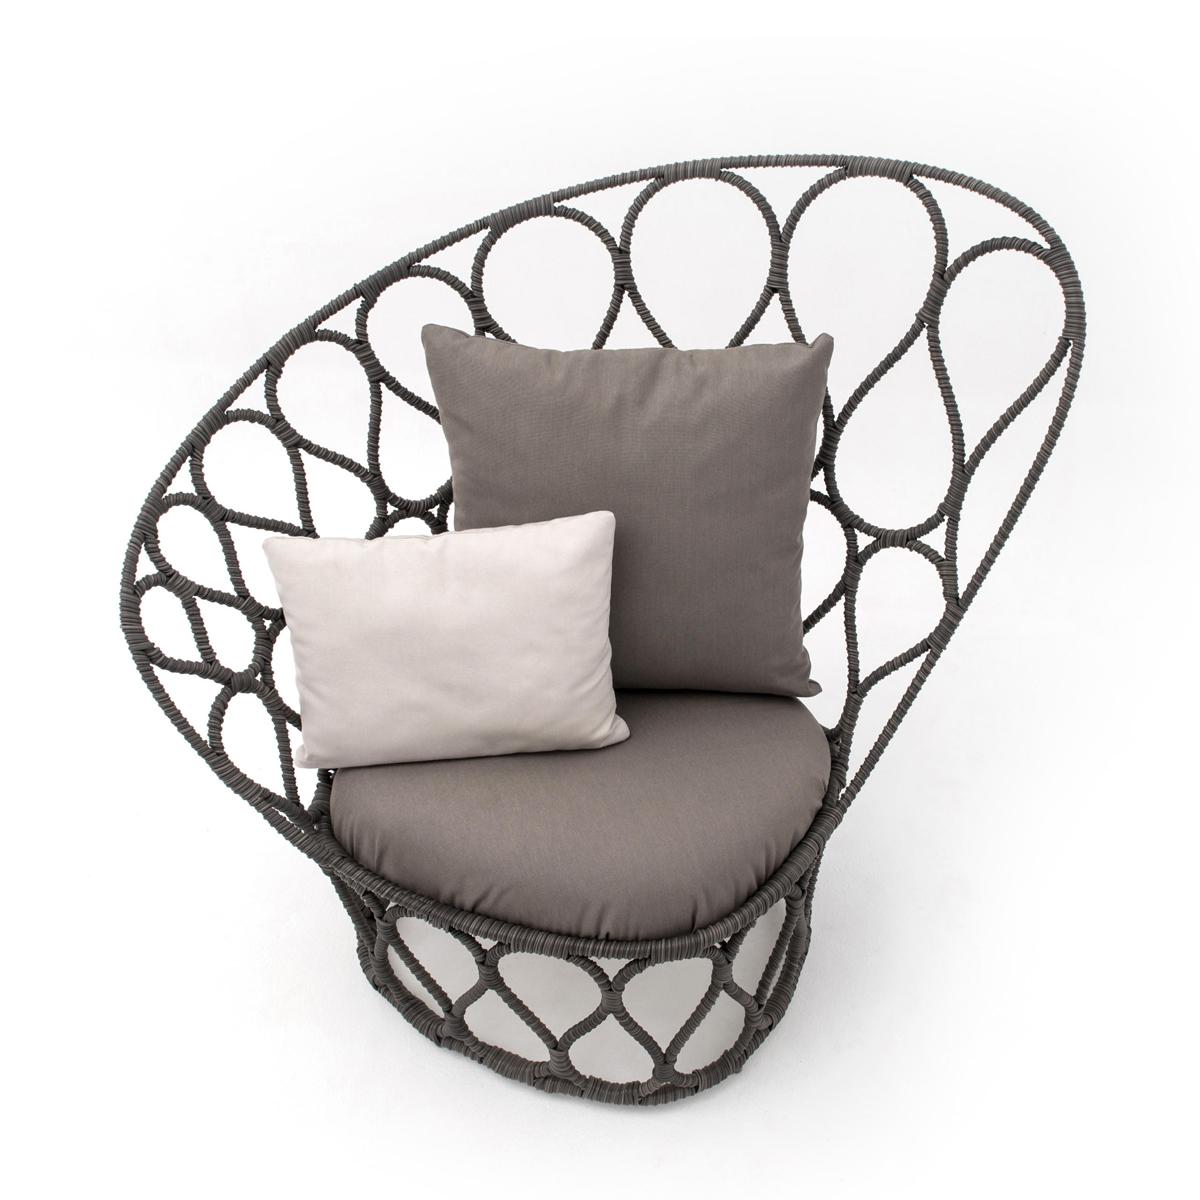 Chair butterfly wing left or right chair
With steel structure and with polyethylene
Canvas hand braided, structure in pale gray color. 
With seat cushion included, seat cushion in taupe 
color. Indoor or outddor furniture.
Lead time production if on